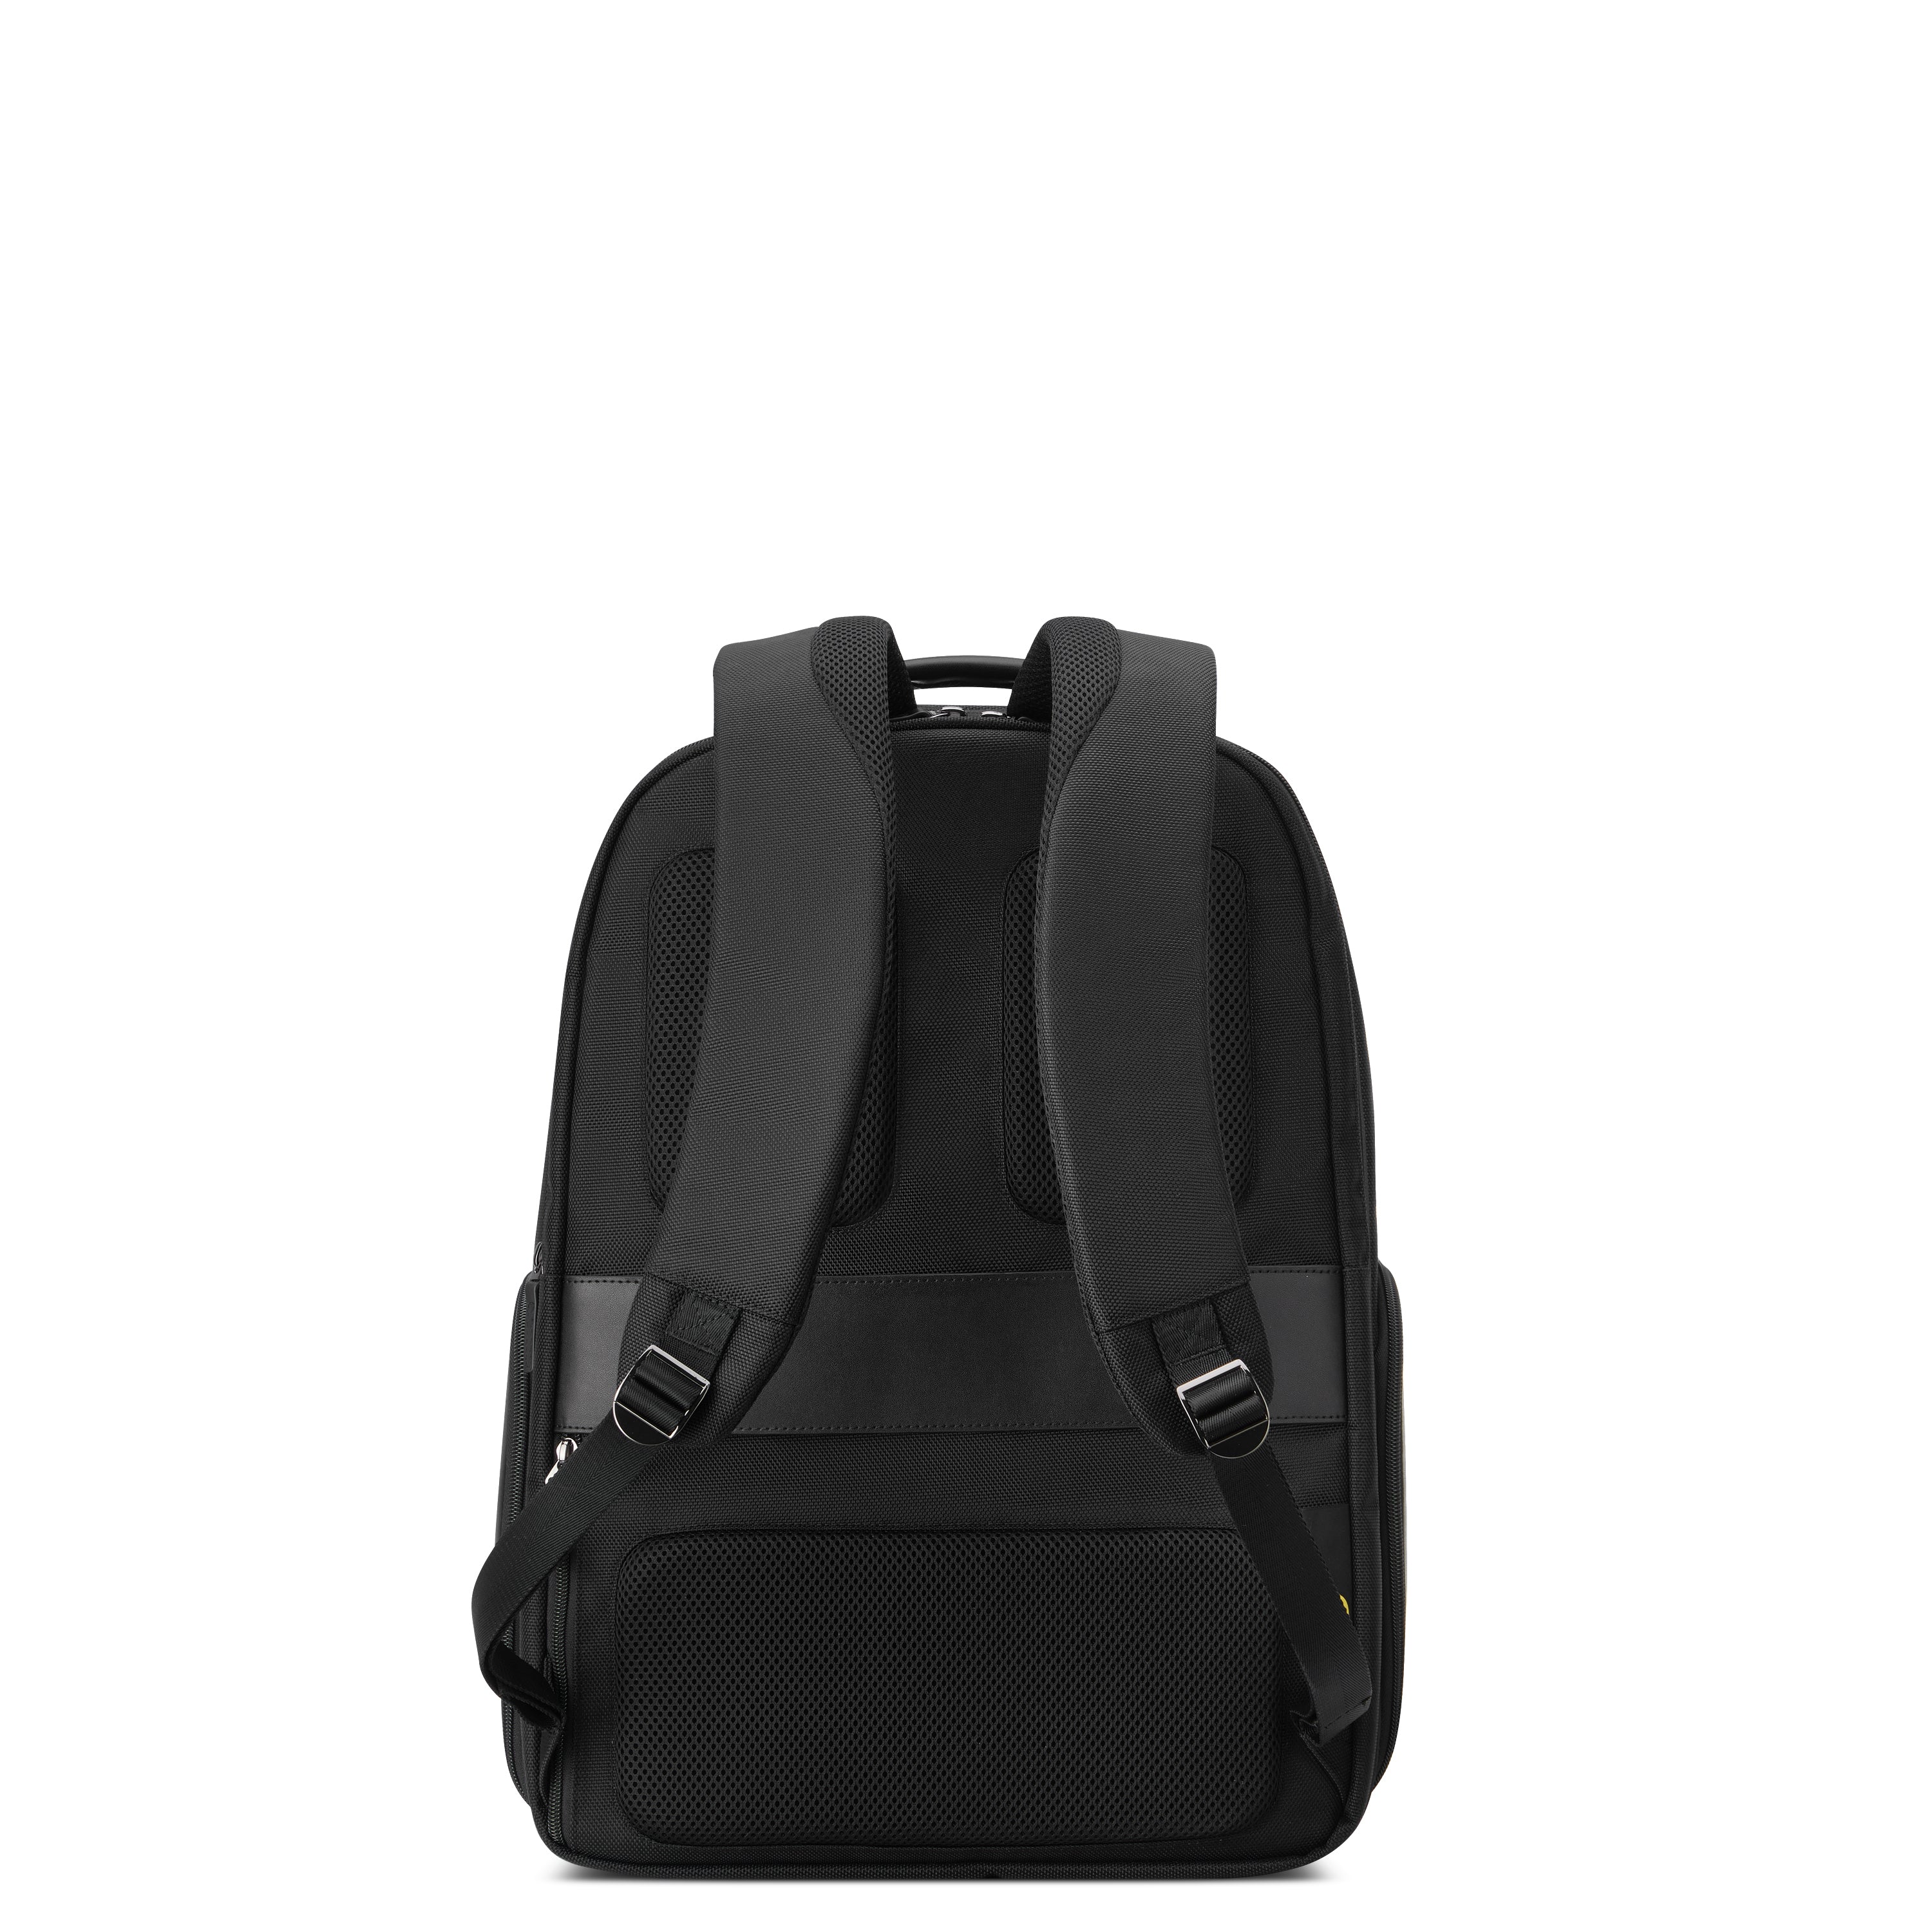 Delsey Wagram 2 Compartment Backpack  Laptop 17.3Inch Black -119962000